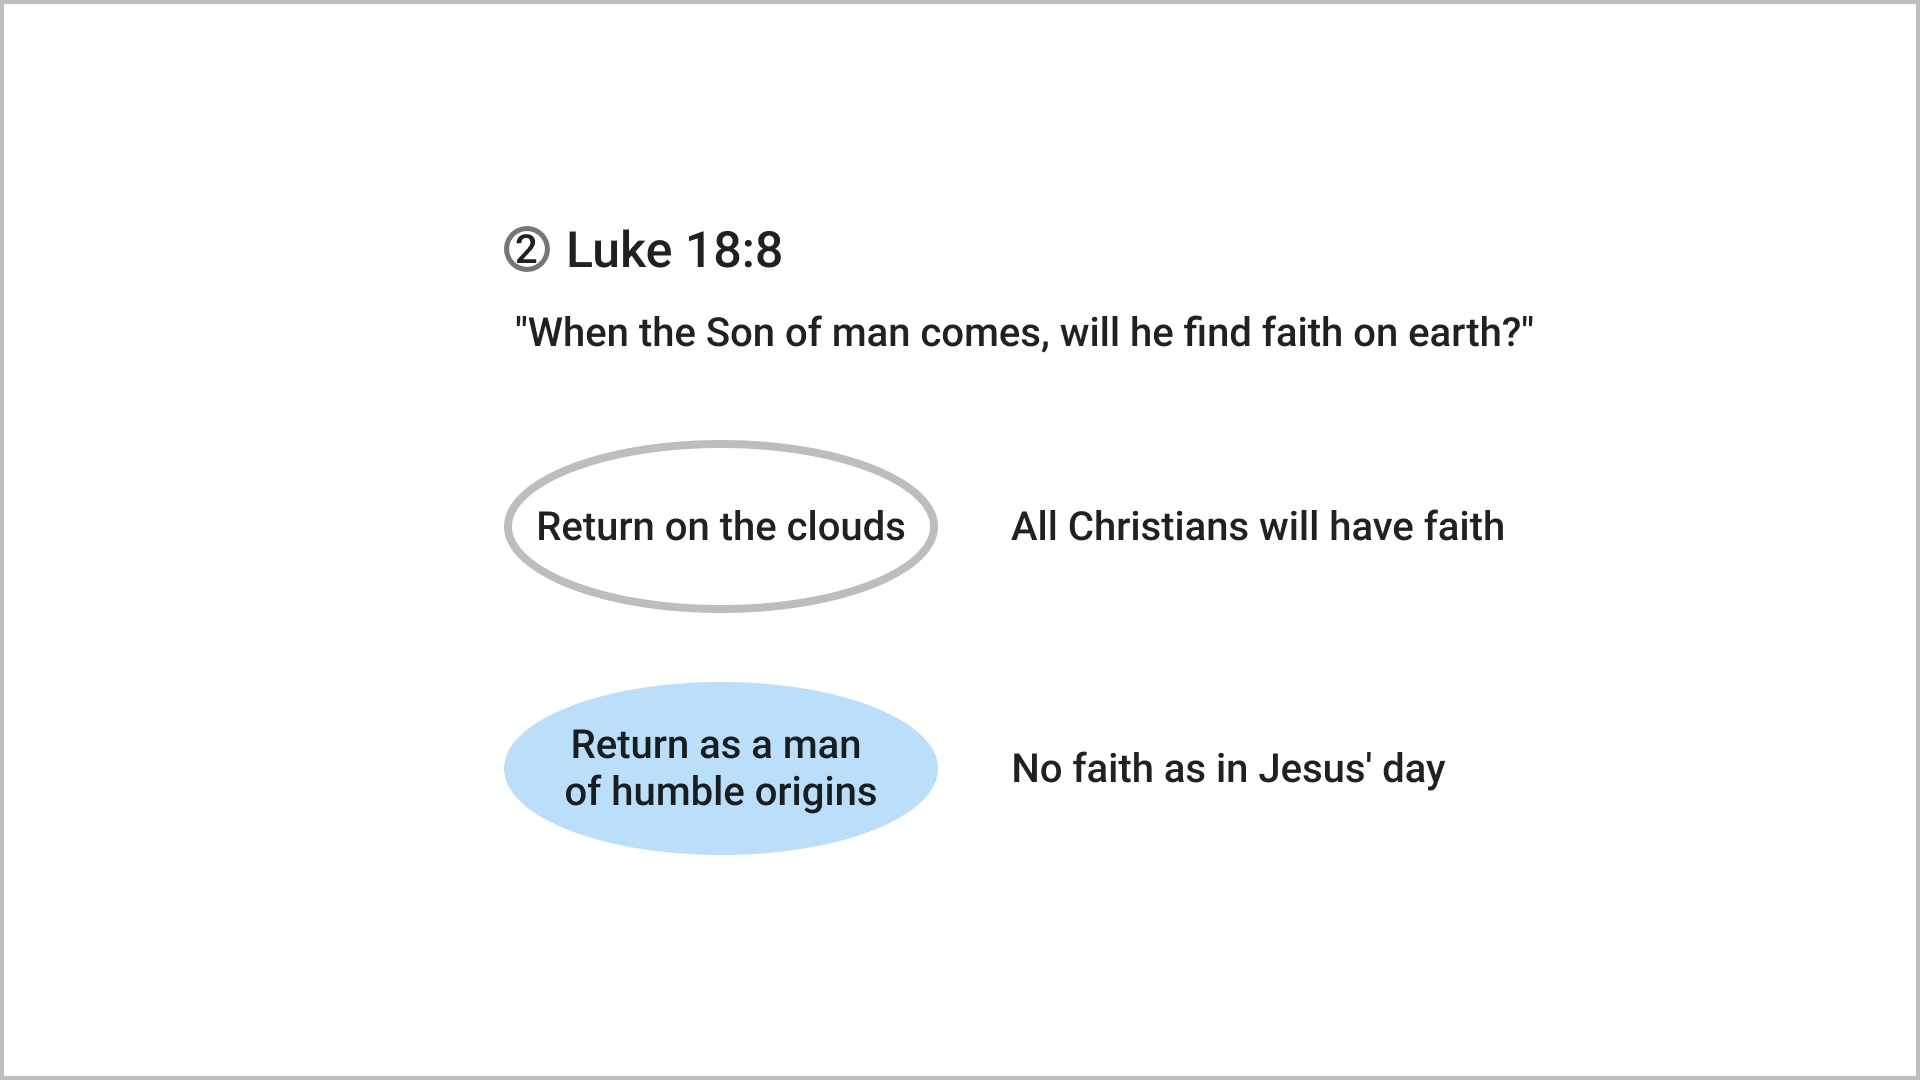 When the Son of man comes, will he find faith on earth?